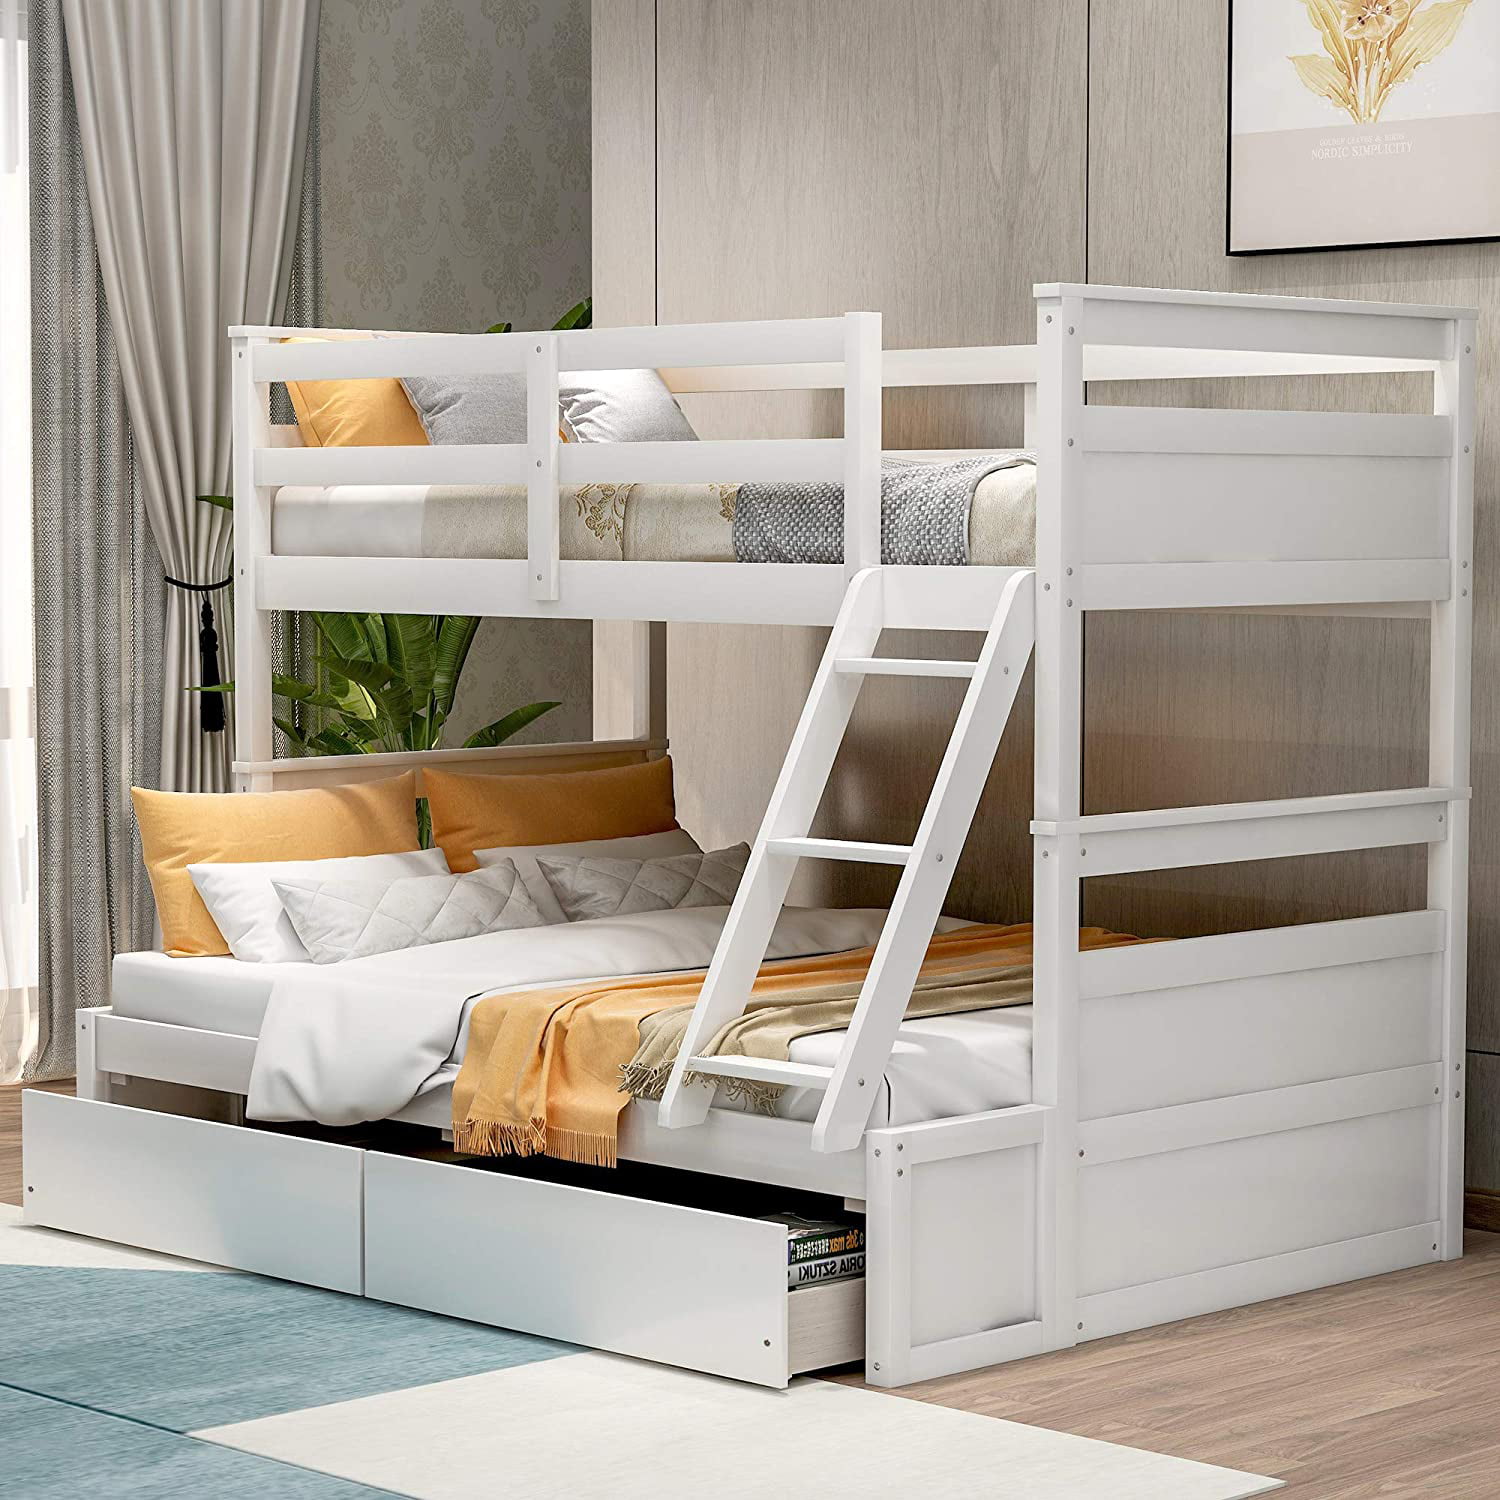 Twin Over Full Bunk Bed With Ladders, Twin Over Full Bunk Bed With Storage Ladder